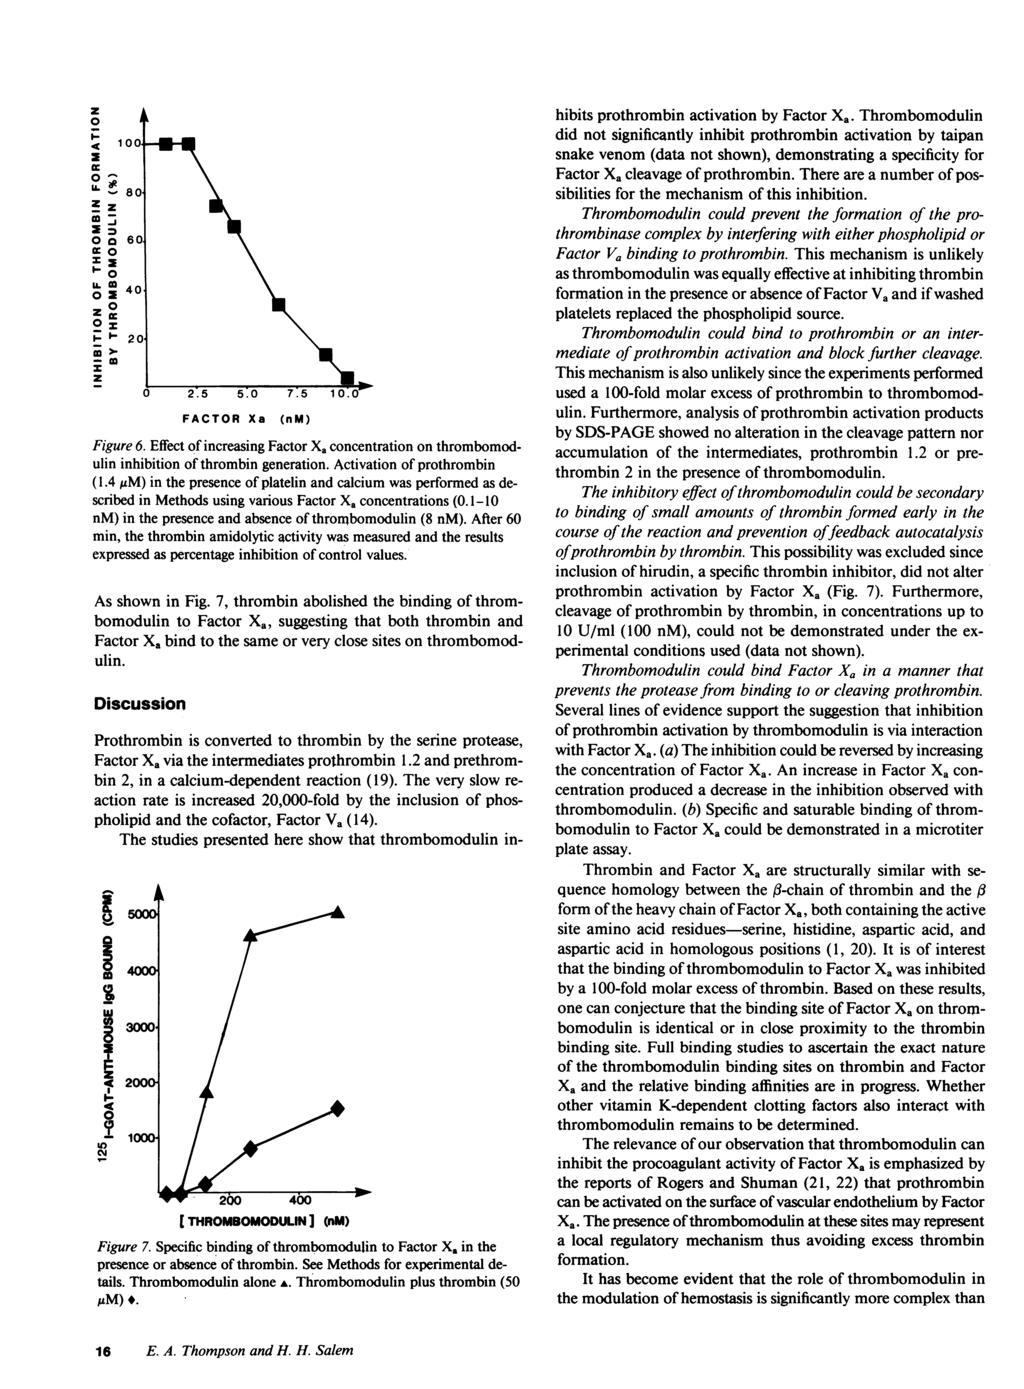 z 0 cā 0 UL 80 Z z o o 60 O a40a z 0 I- 20 -m z 1 0O _ 0 2.5 5.0 7.5 10 0 FACTOR Xa (nm) Figure 6. Effect of increasing Factor X. concentration on thrombomodulin inhibition of thrombin generation.